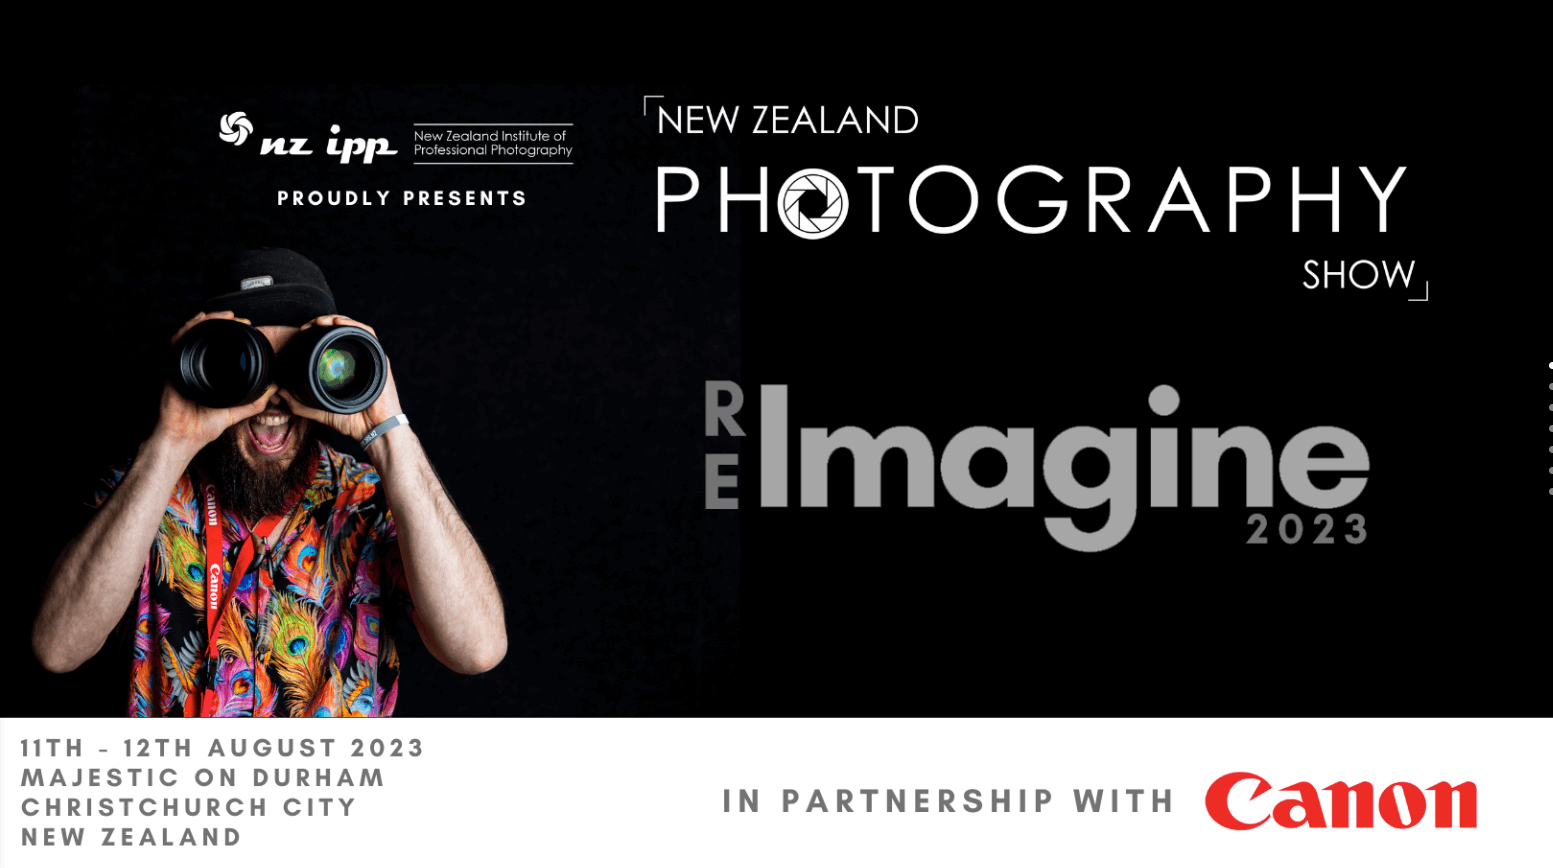 New Zealand Photography Show 2023